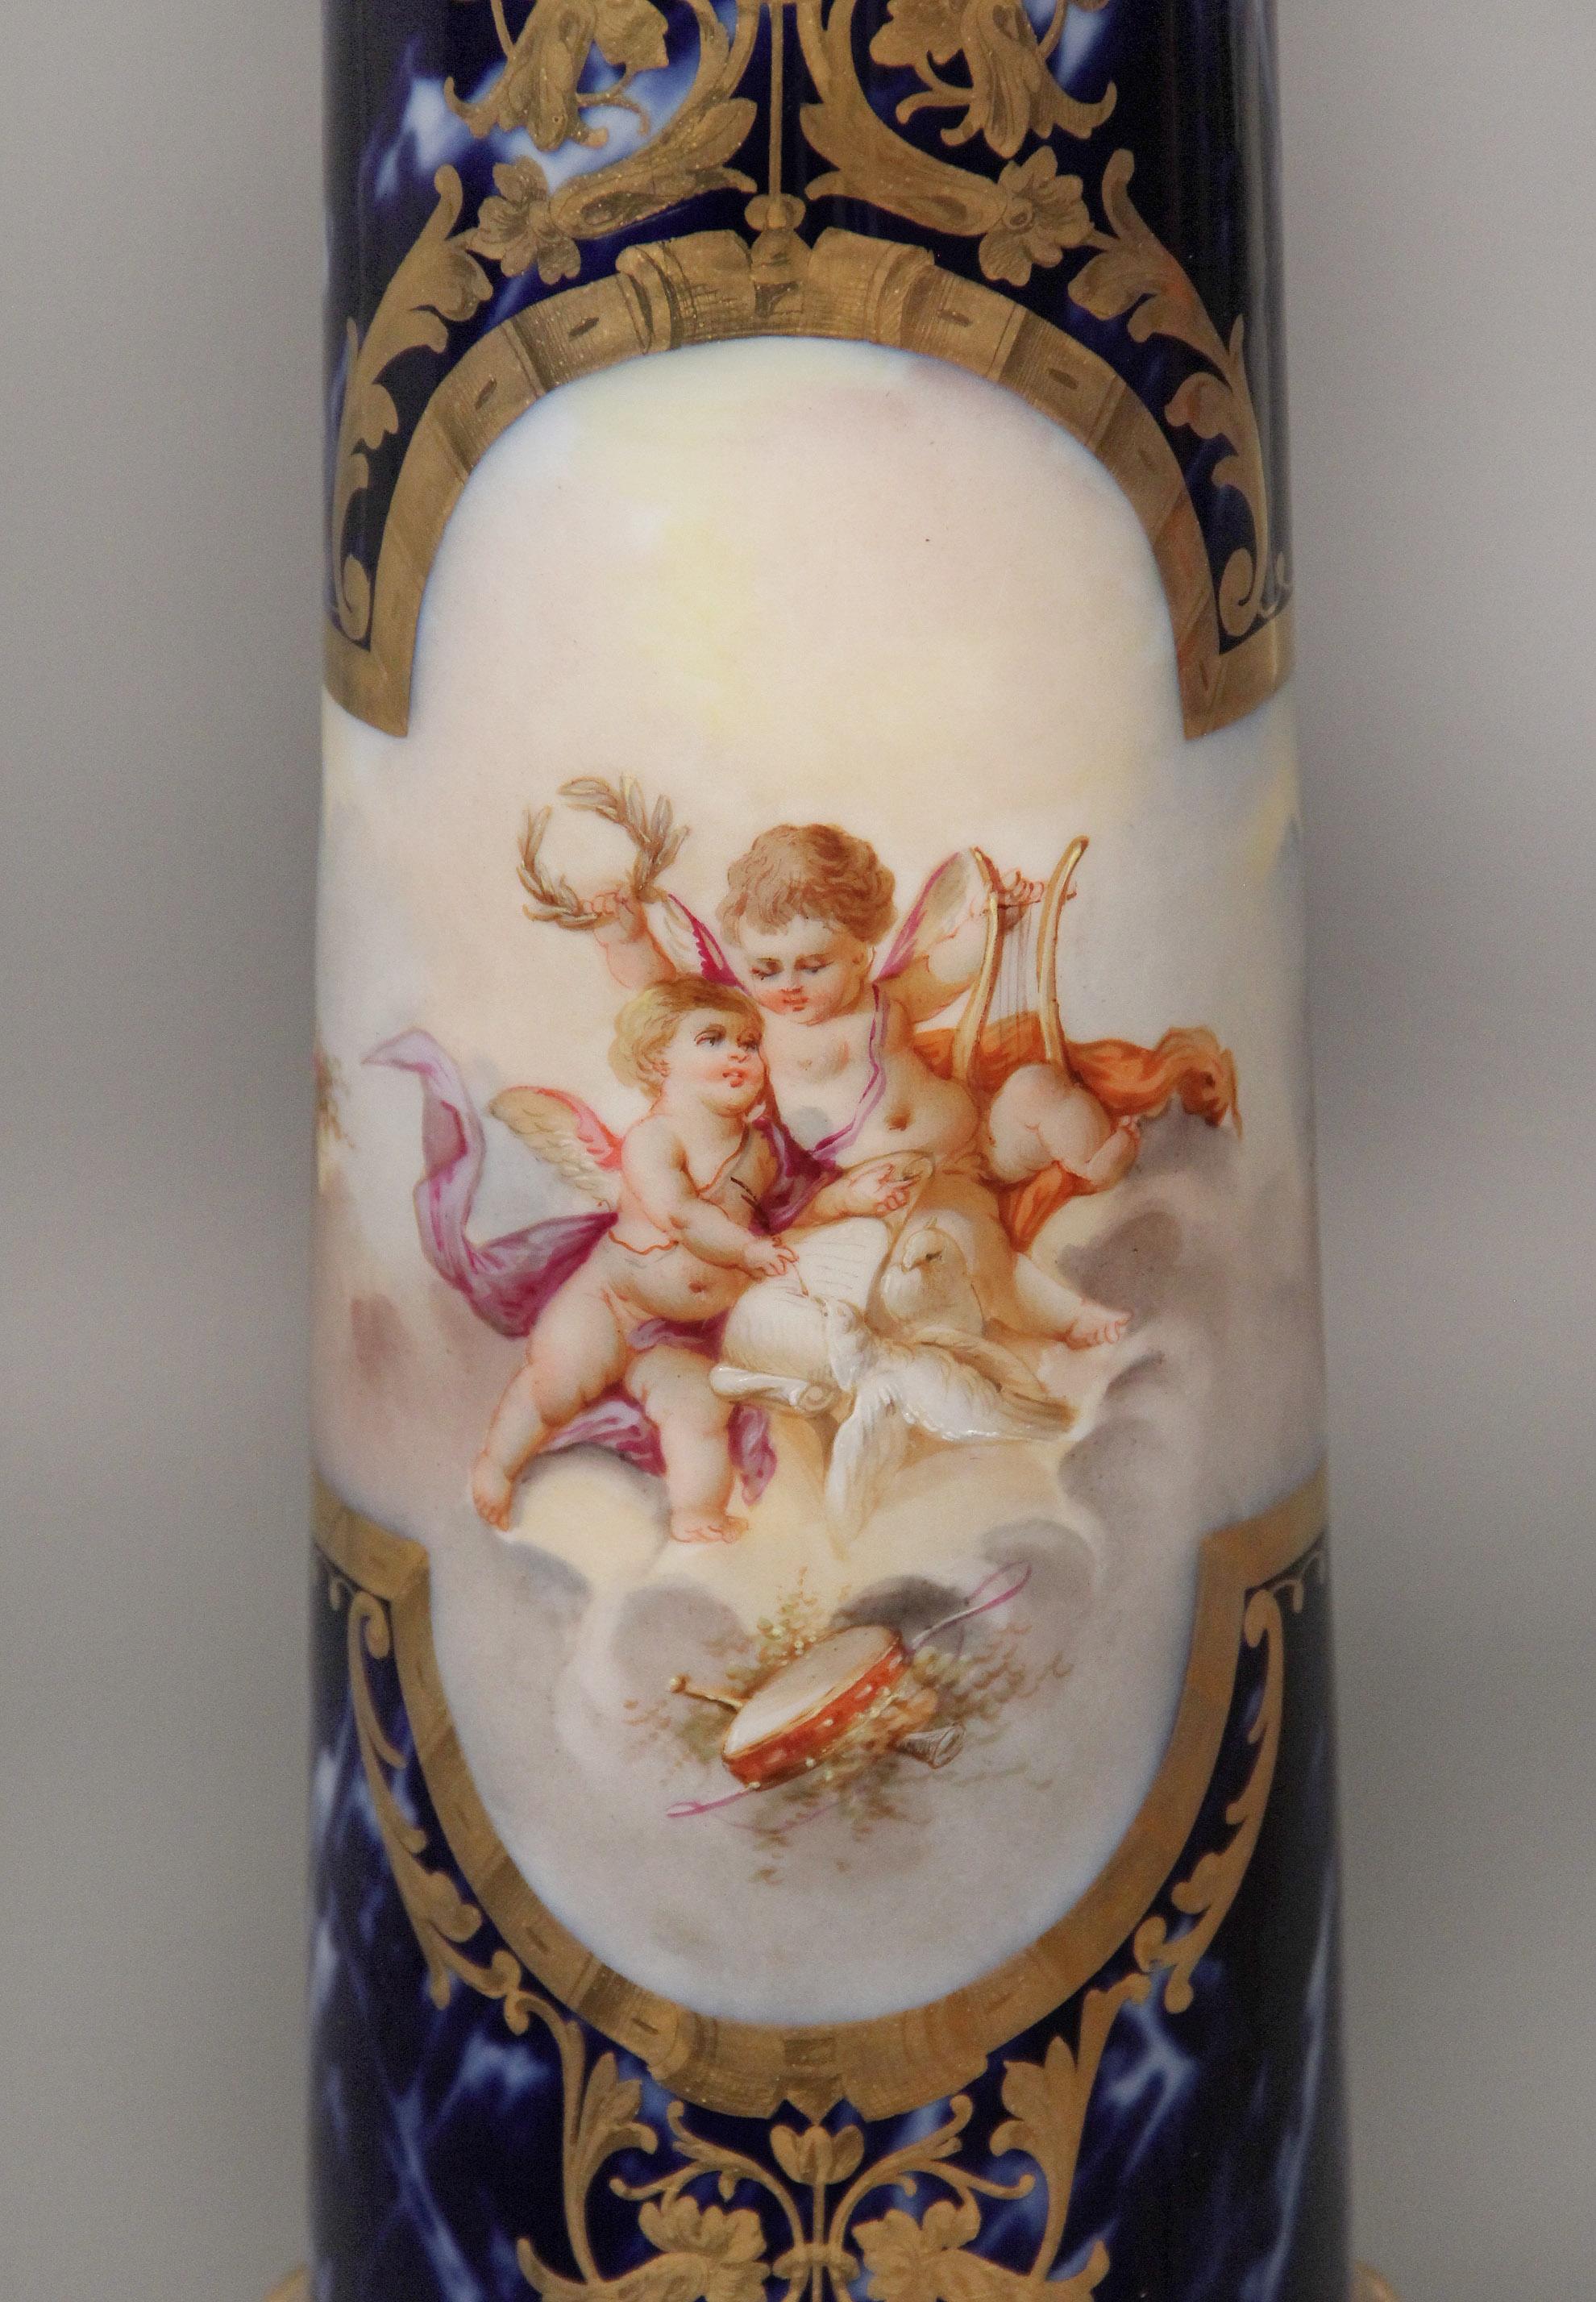 A rare and fantastic late 19th century gilt bronze mounted onyx and Sèvres style pedestal.

Square onyx top above a columnar support painted with lovely scenes of women and cherubs, the back painted with more cherubs and women, surrounded by